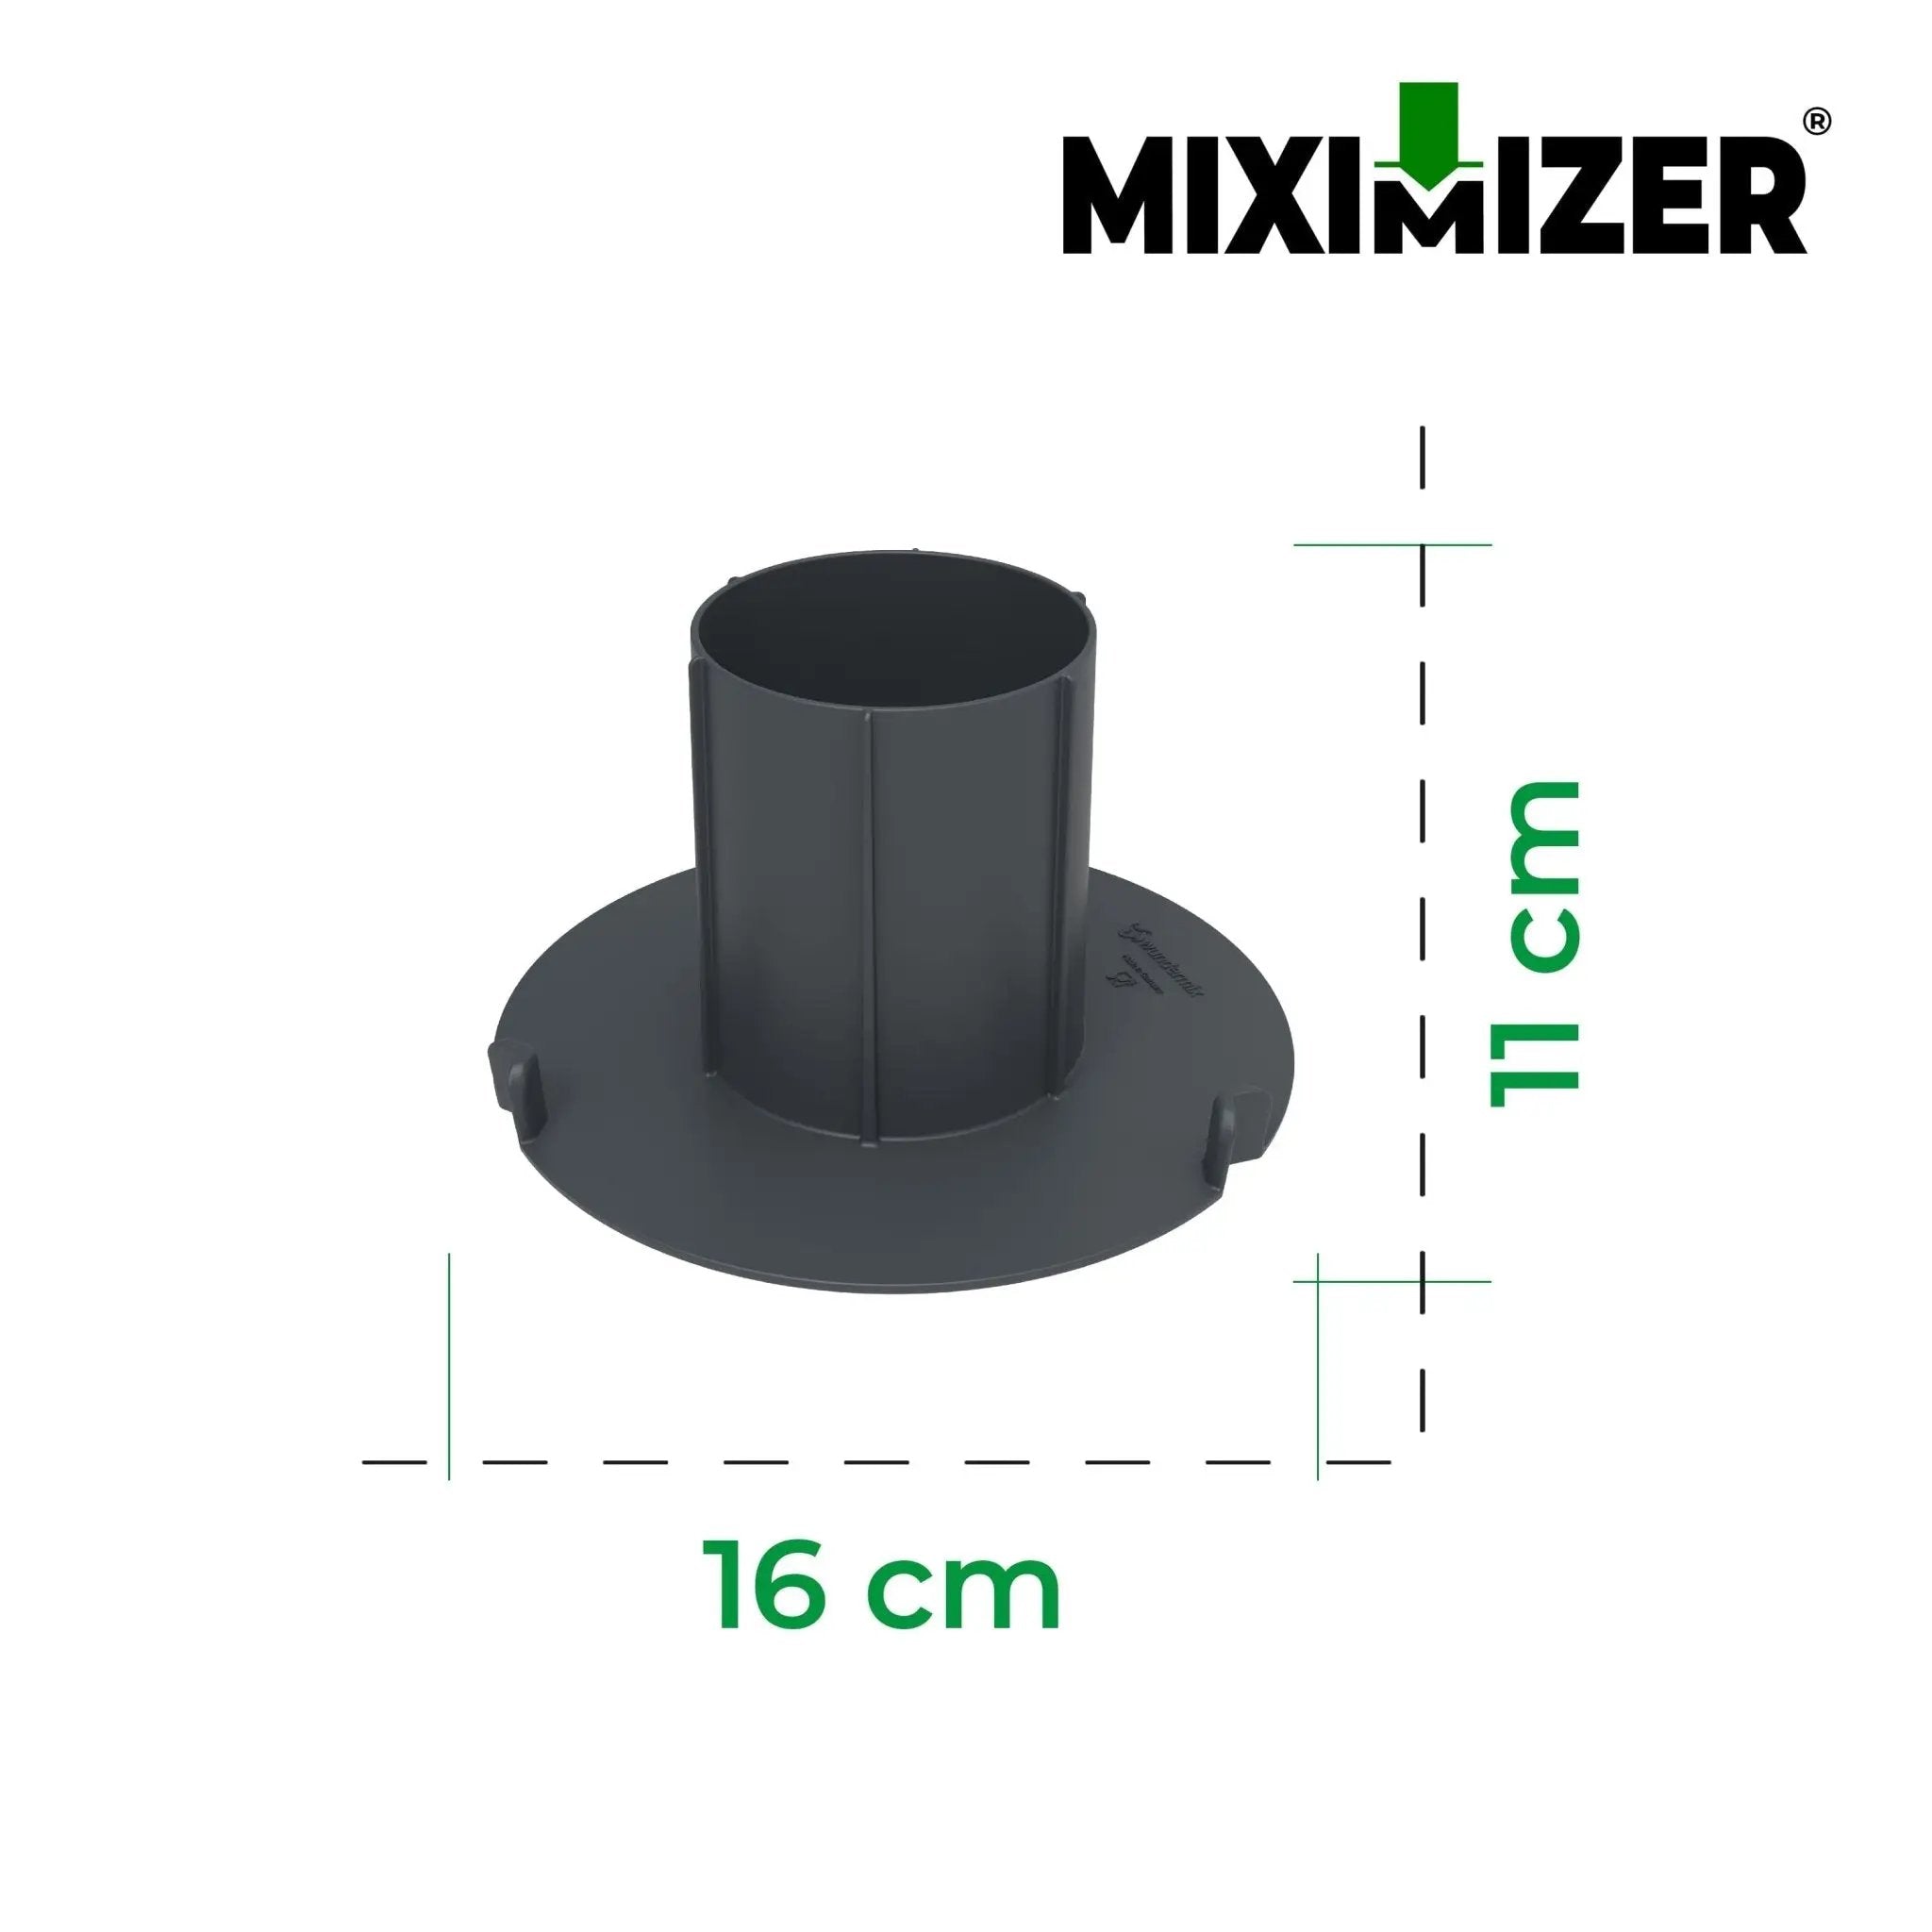 Miximizer  mixing bowl reduction for Thermomix